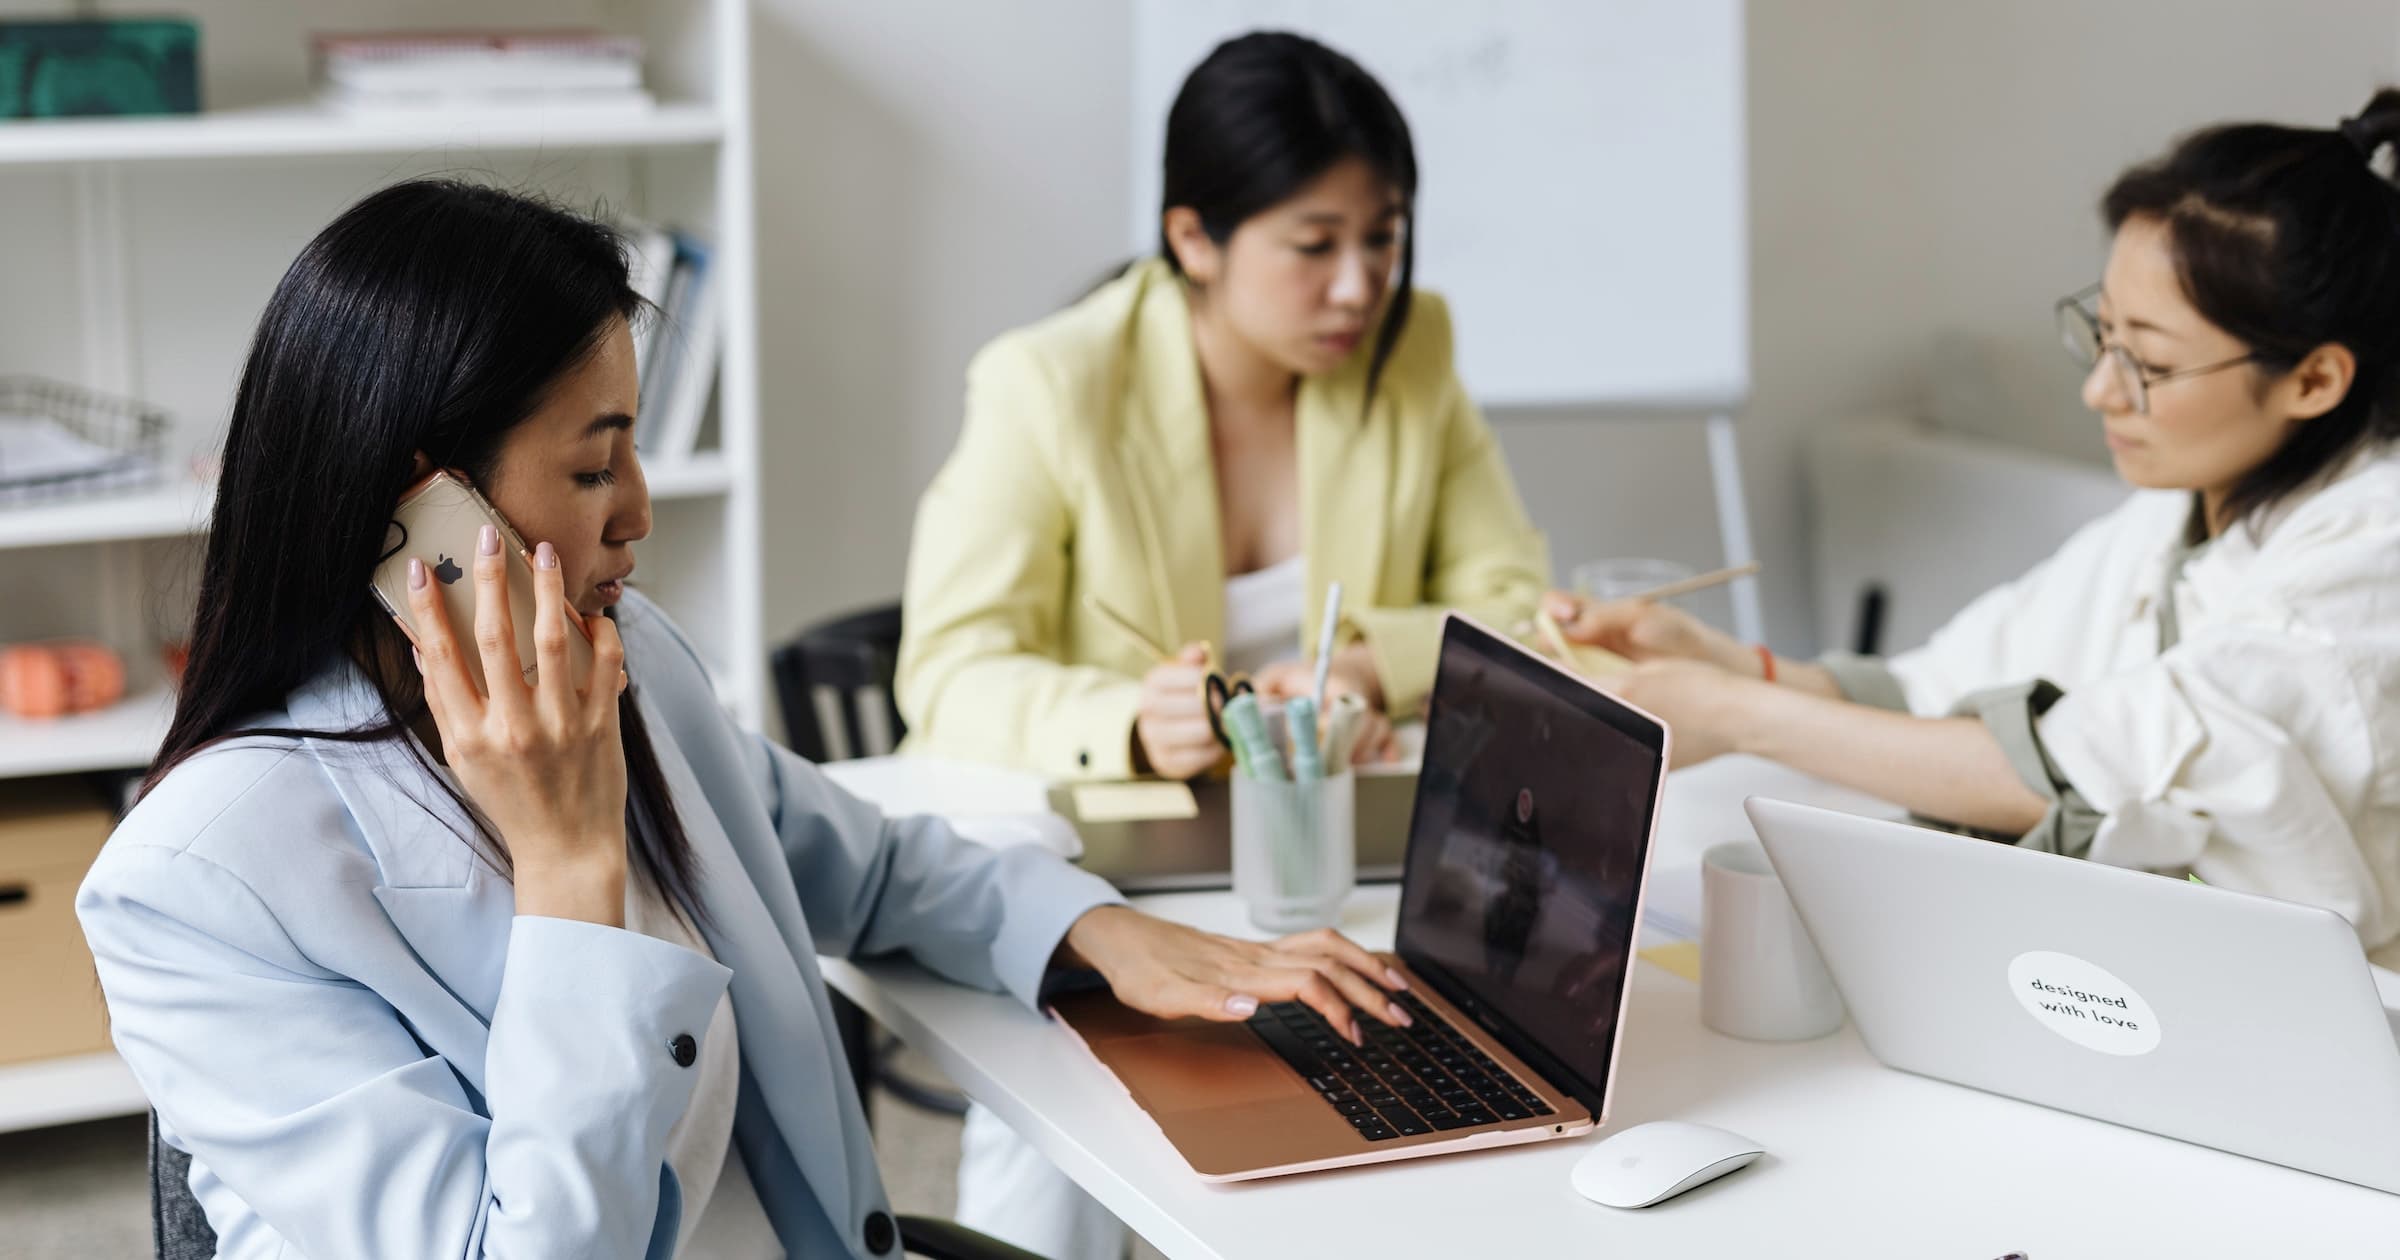 Three women in business attire working at a desk with laptops, one is on the phone